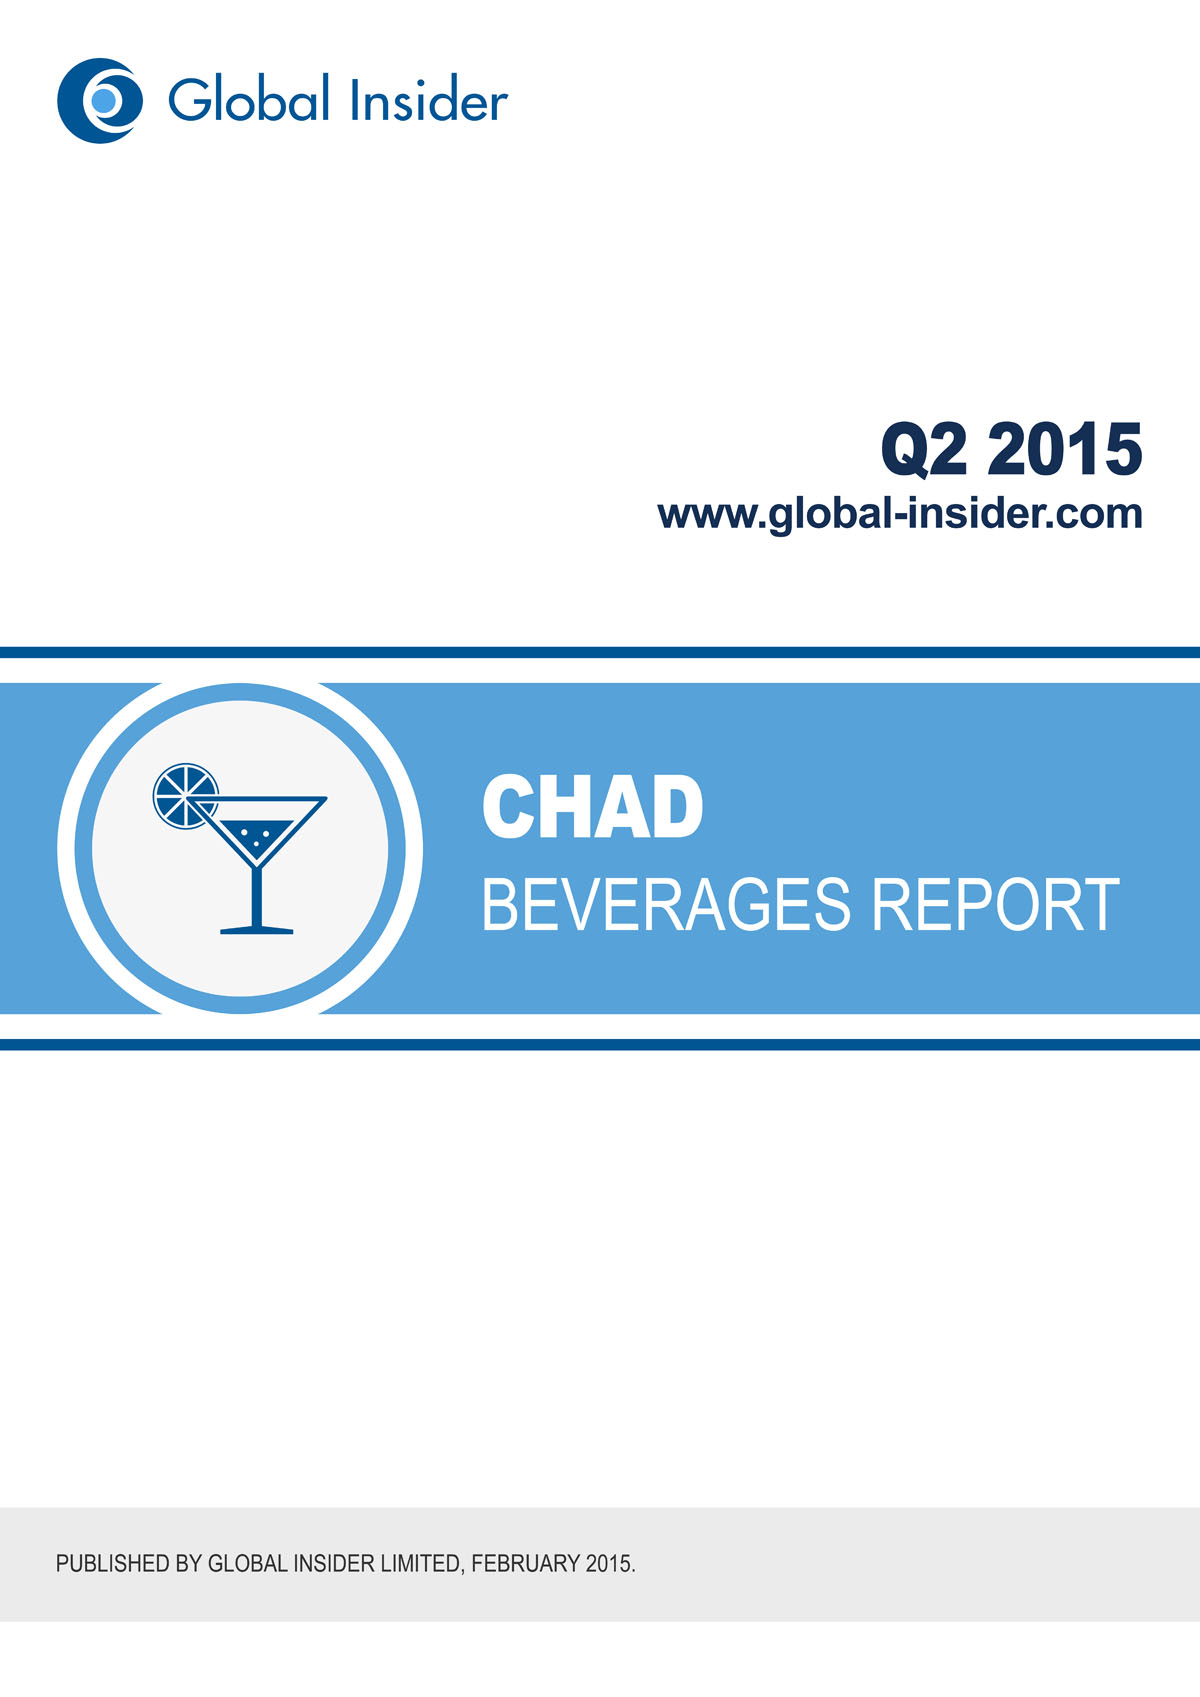 Chad Beverages Report